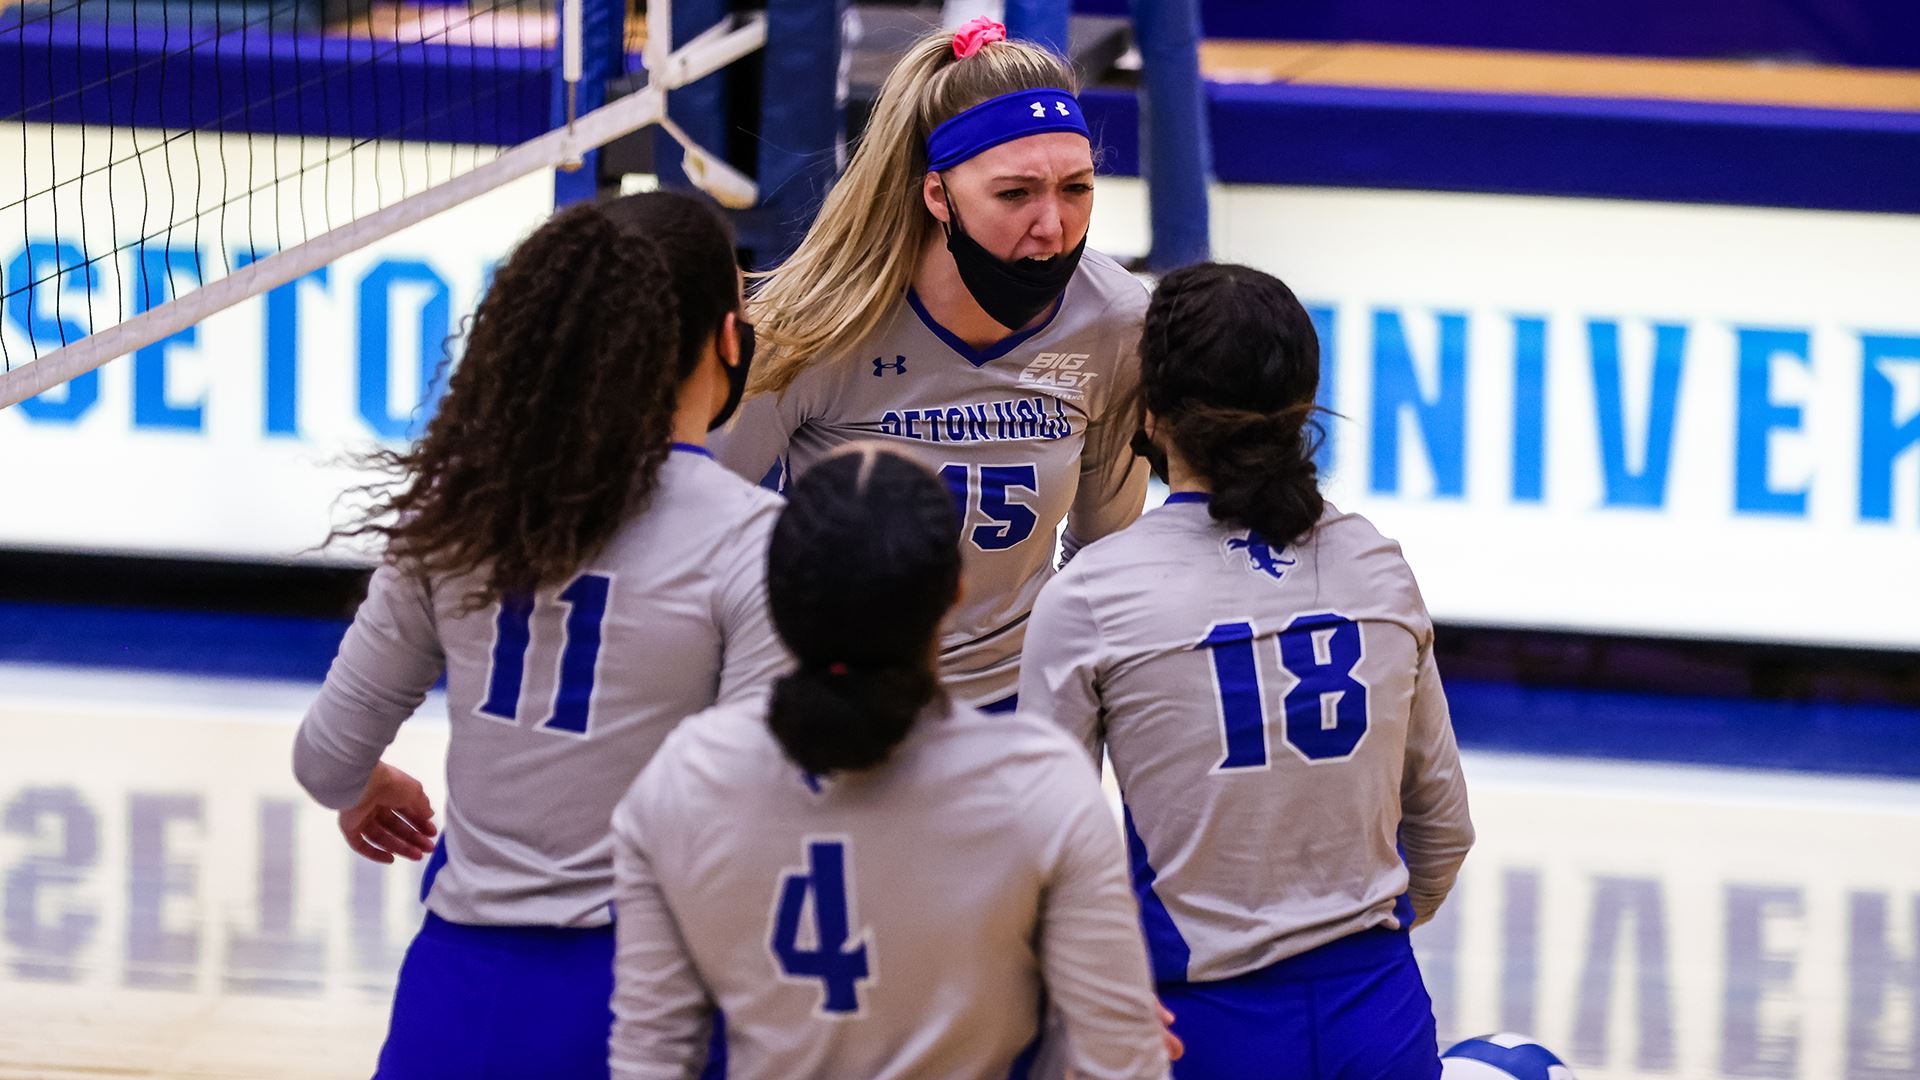 The Seton Hall women's volleyball team stand on the court during a game in Utah.